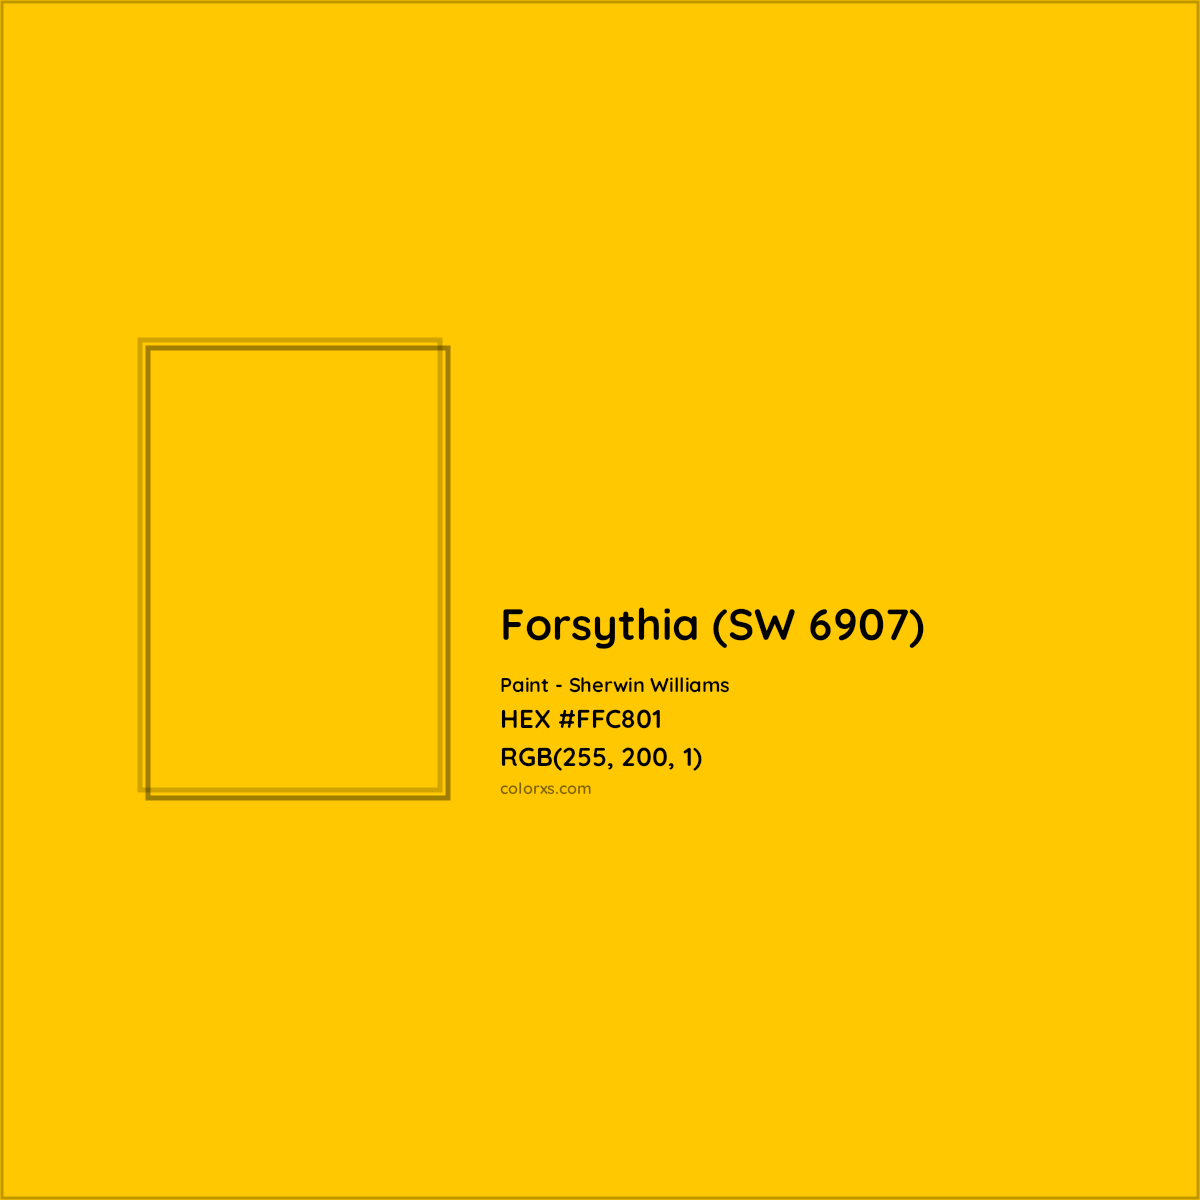 HEX #FFC801 Forsythia (SW 6907) Paint Sherwin Williams - Color Code